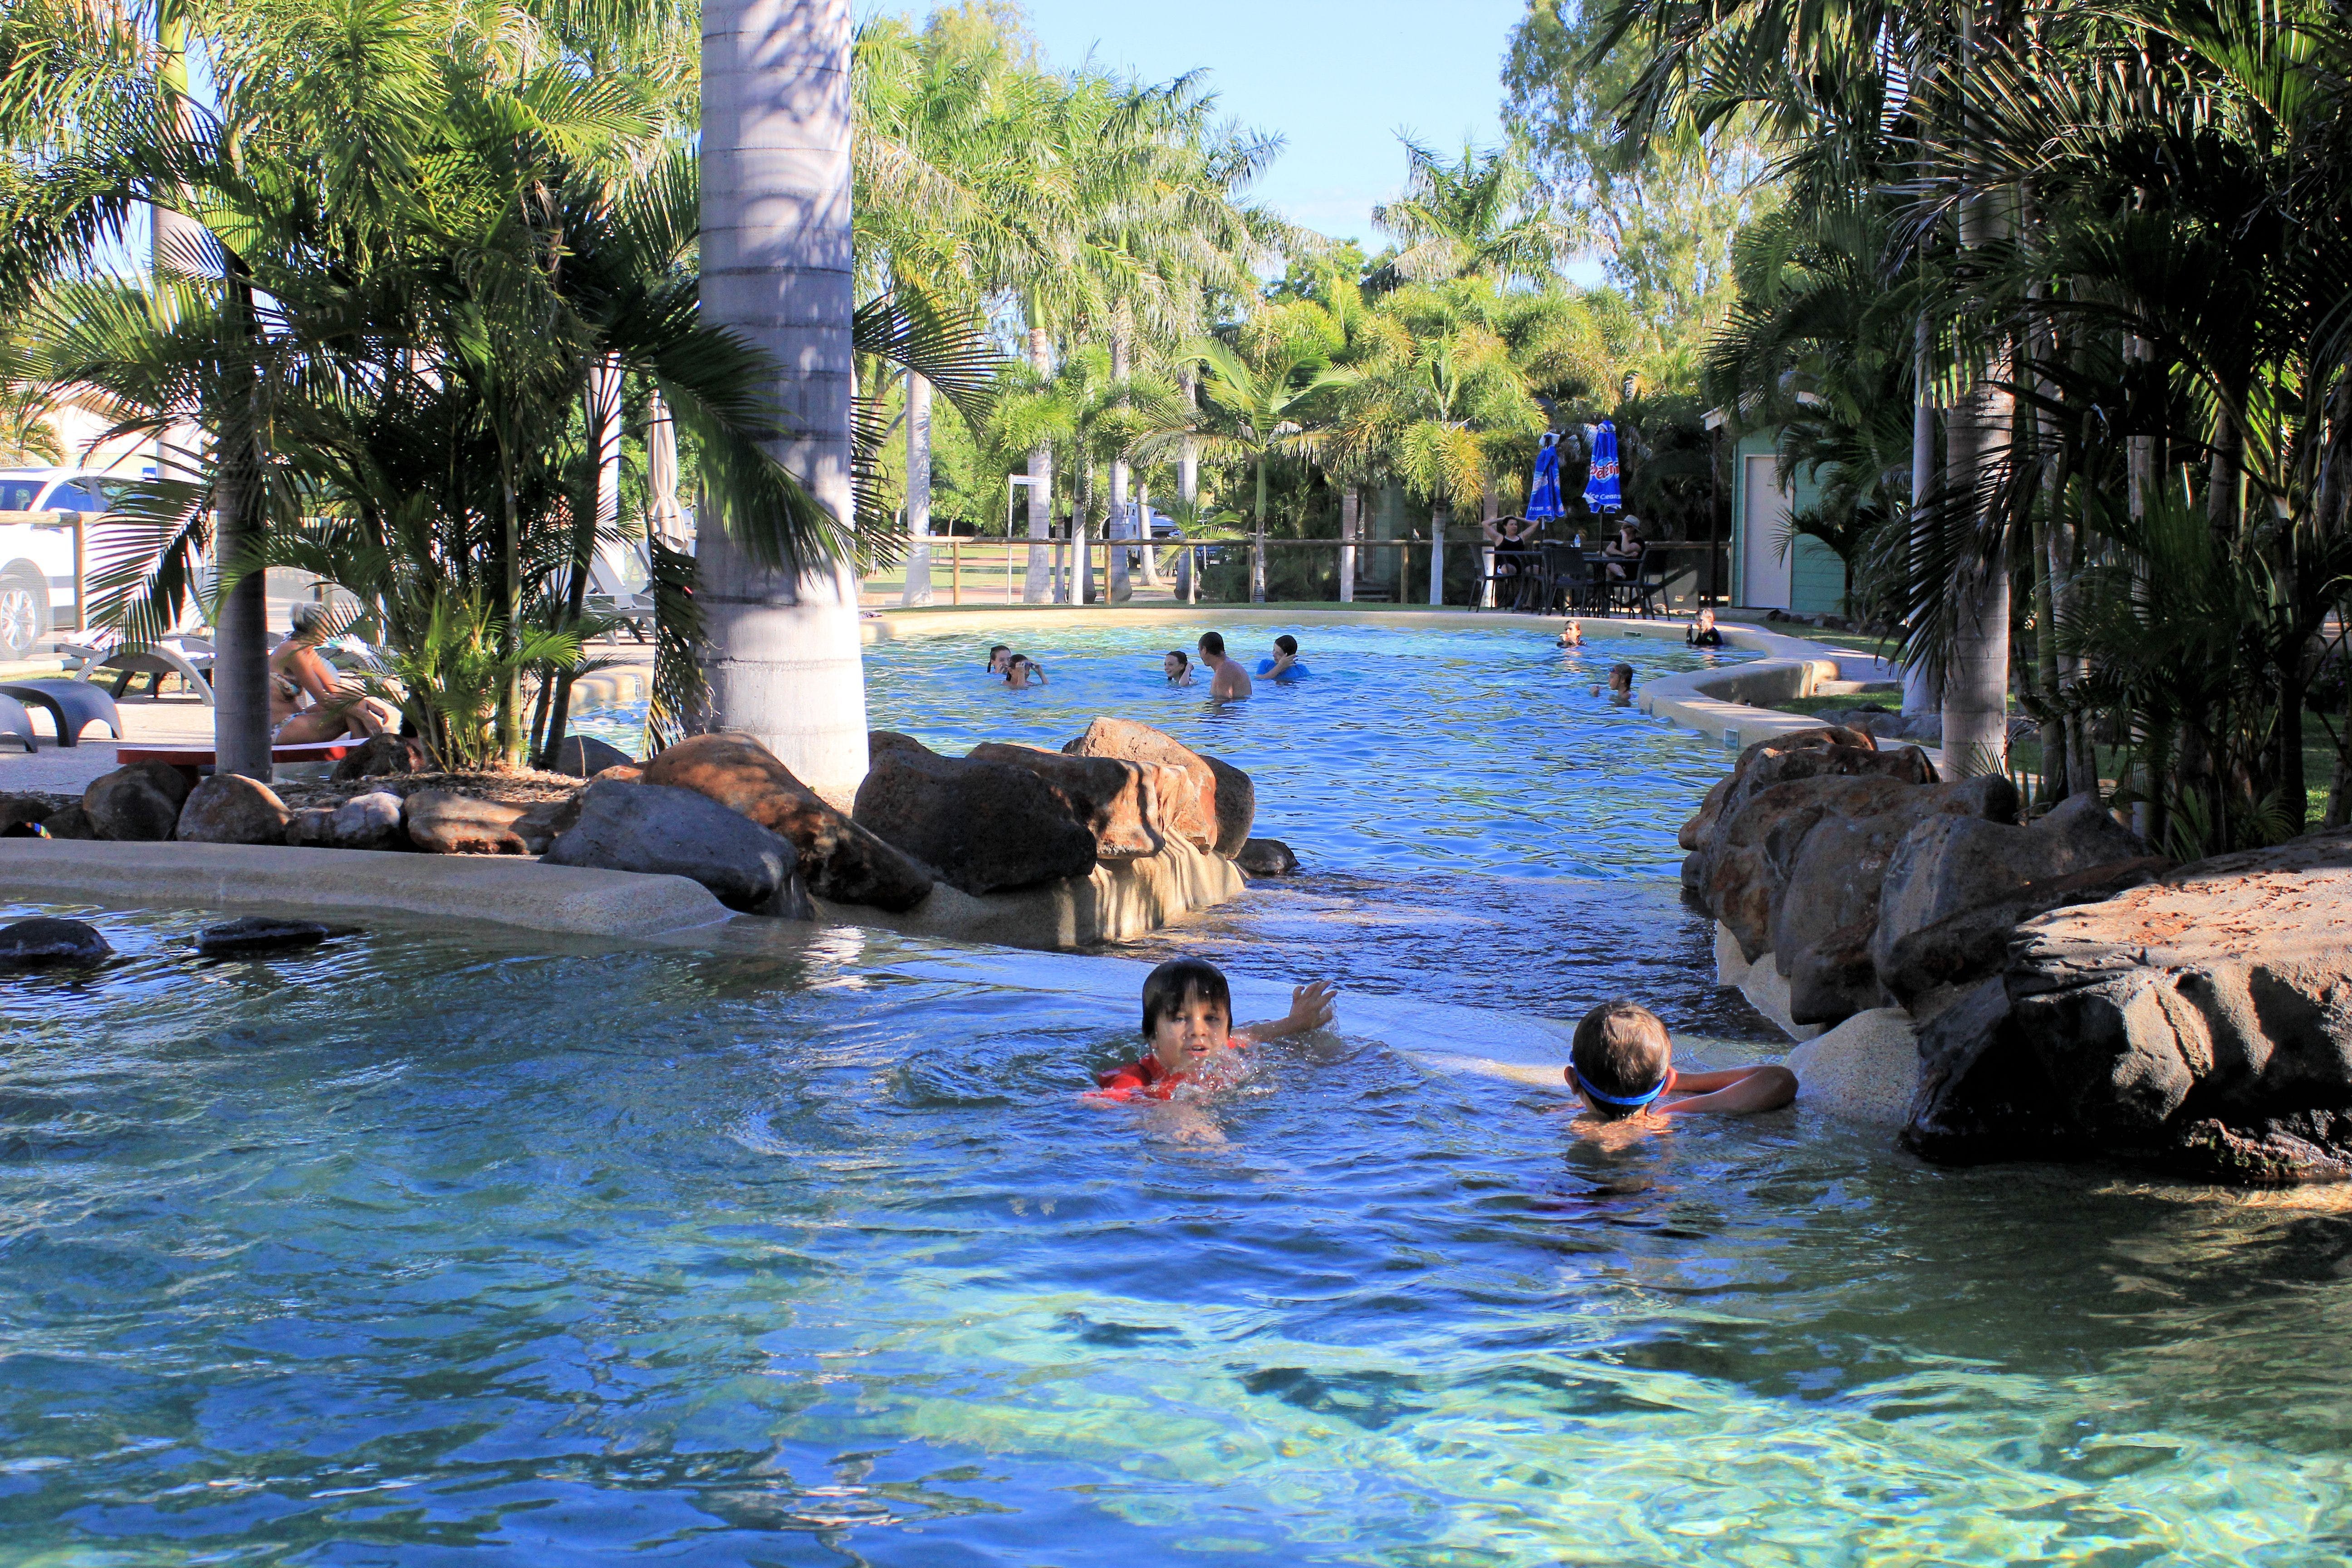 Big4 Aussie Outback Oasis Holiday Park - Hervey Bay Accommodation